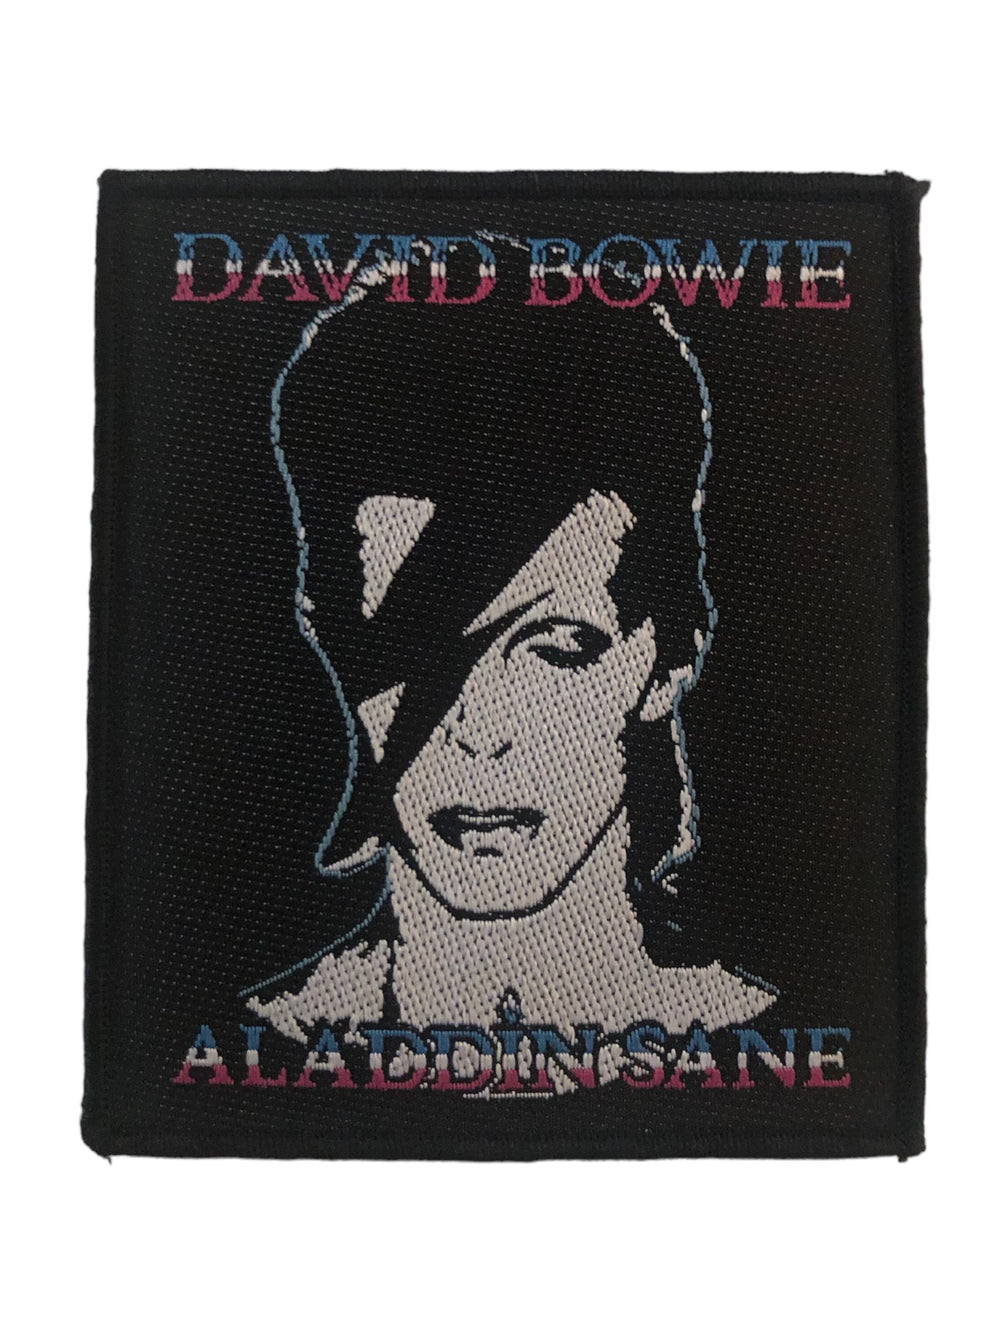 David Bowie Standard Woven Patch: Aladdin Sane Official New